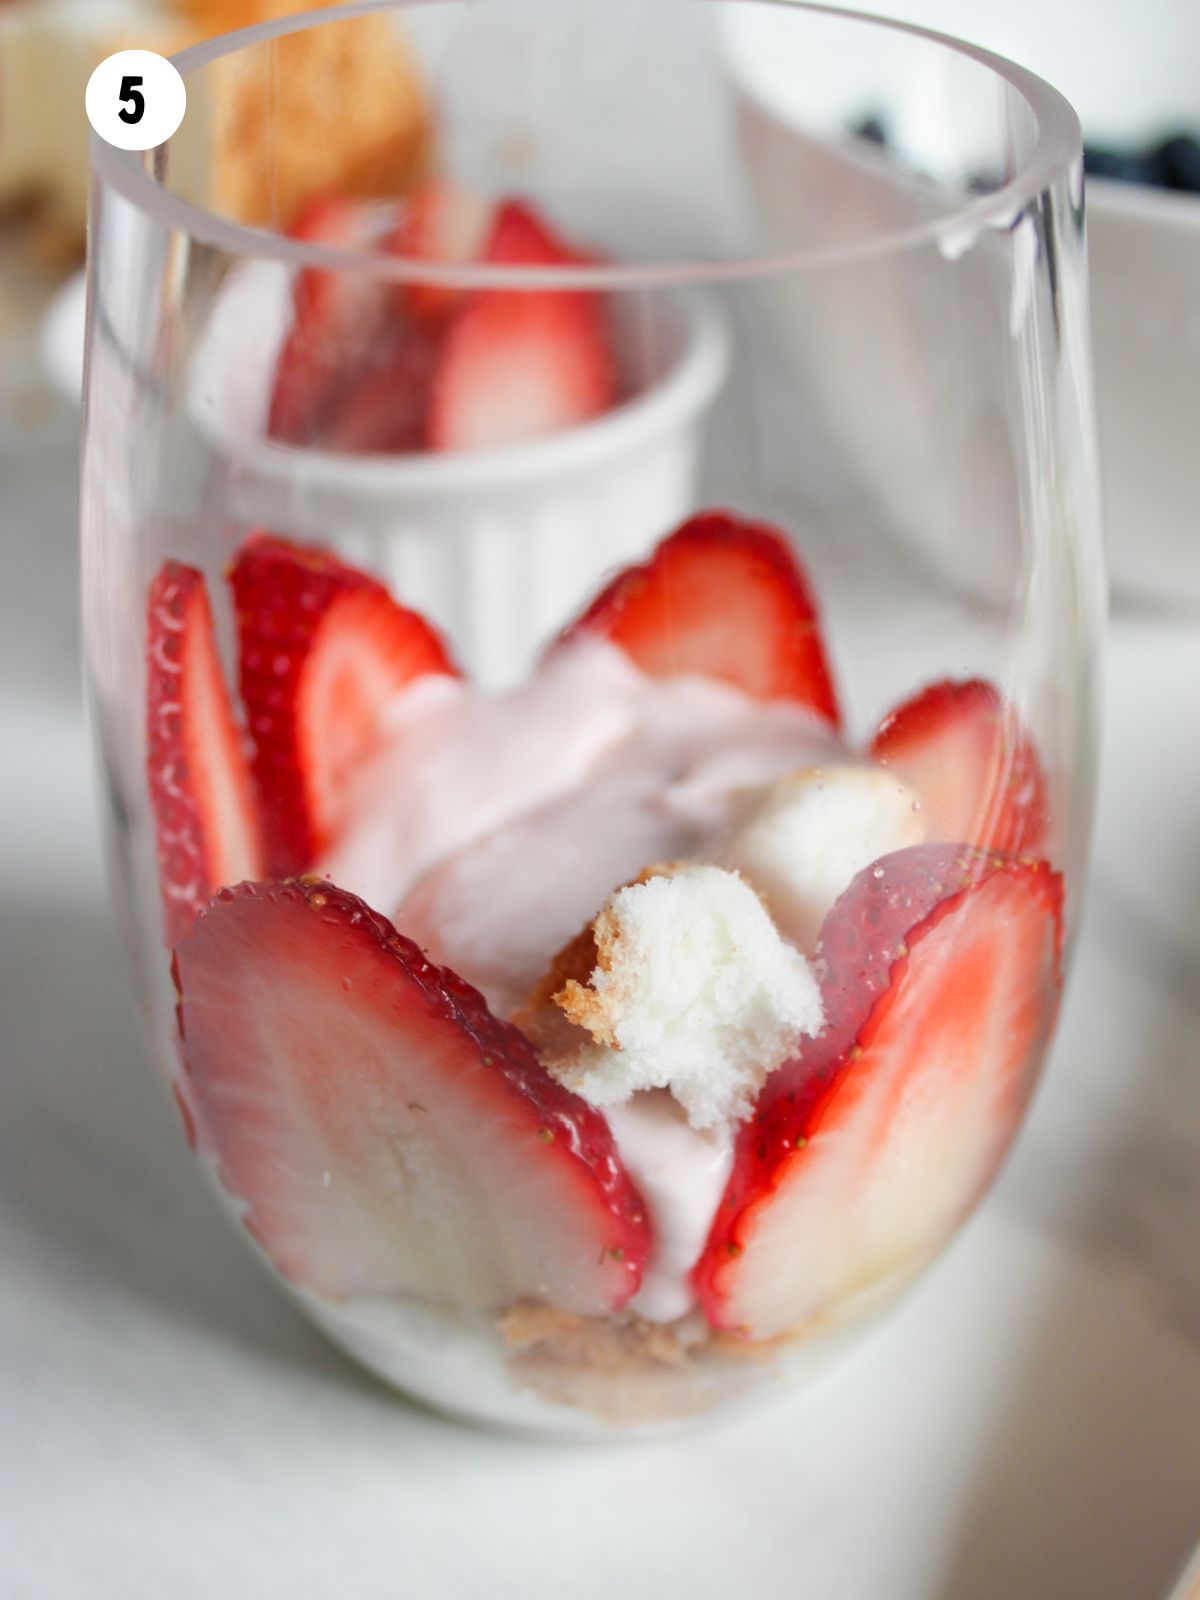 strawberries and angel food cake in a clear glass.